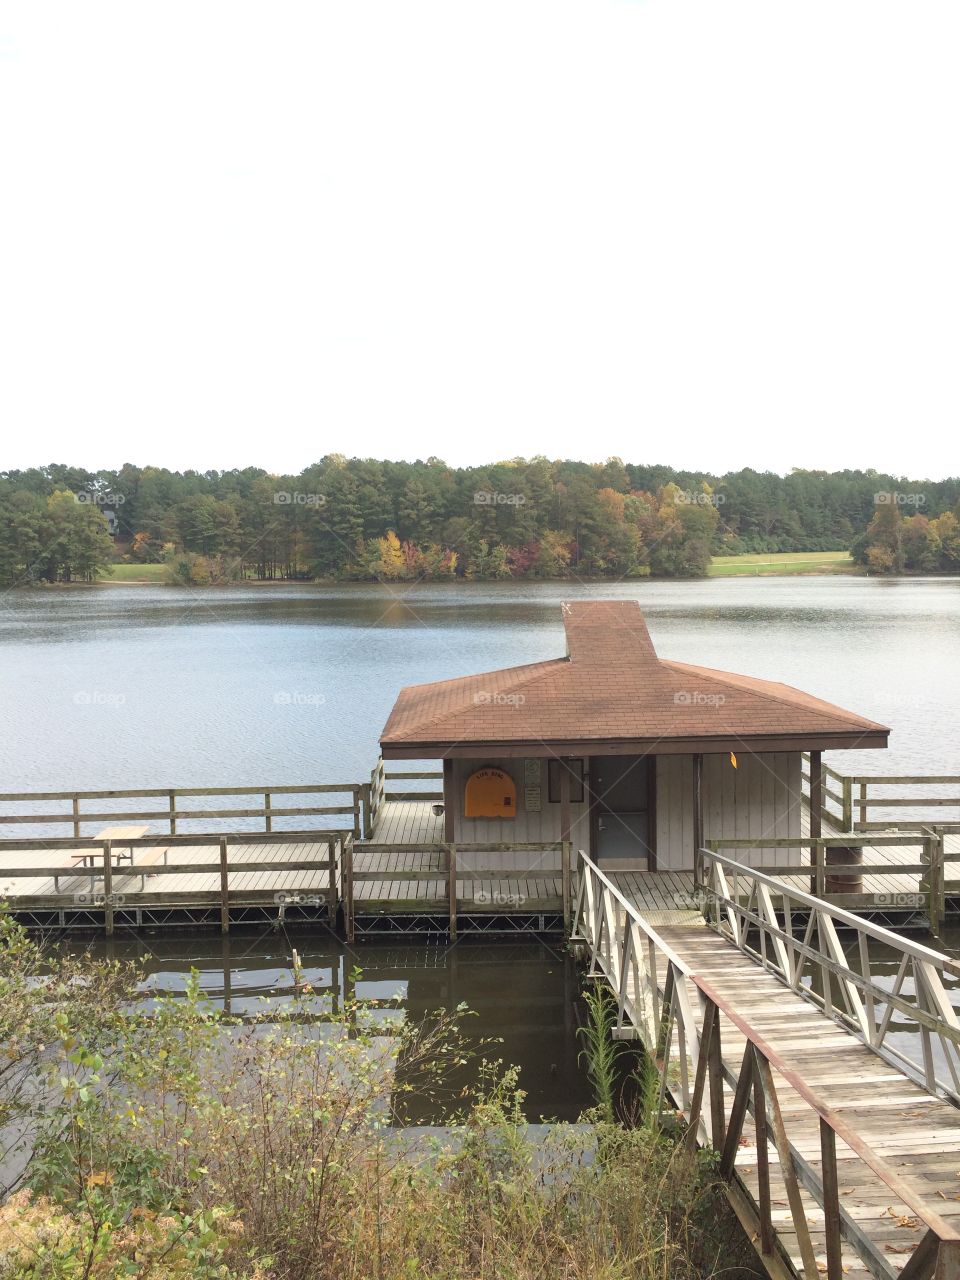 Boathouse by lake w fall trees